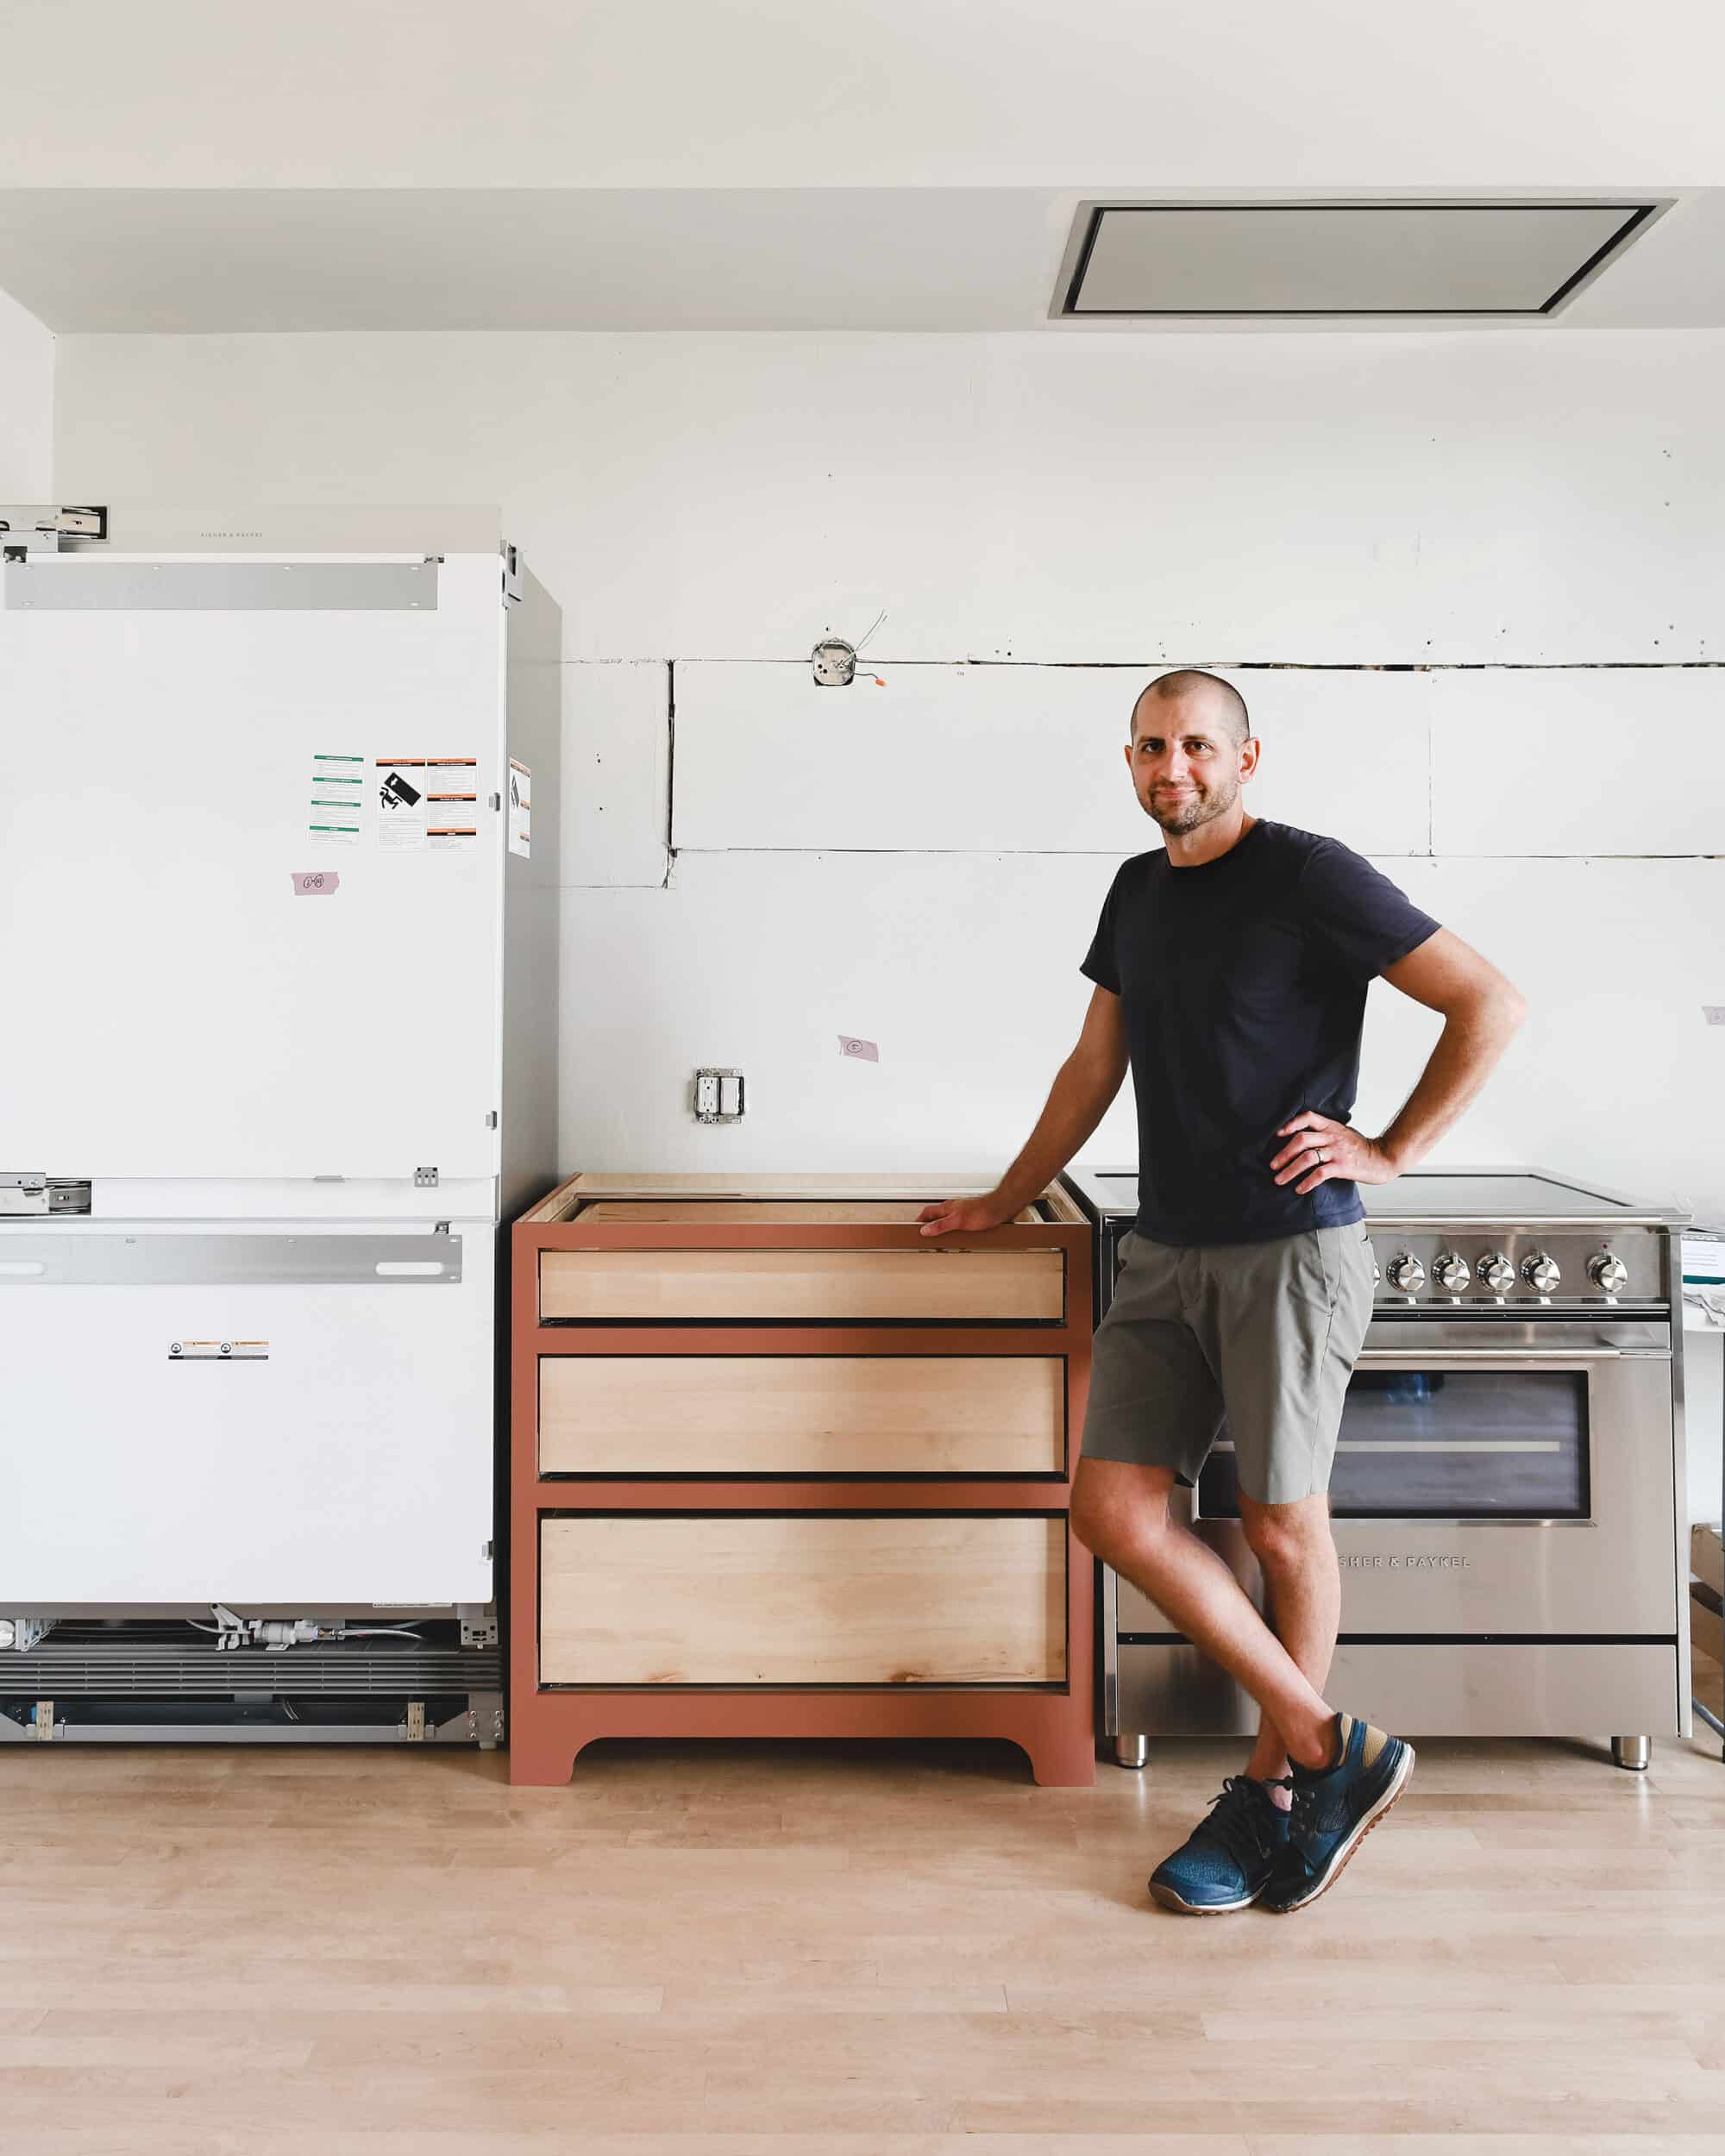 Scott next to our first cabinet build using Cabinet Joint cabinetry // via Yellow Brick Home